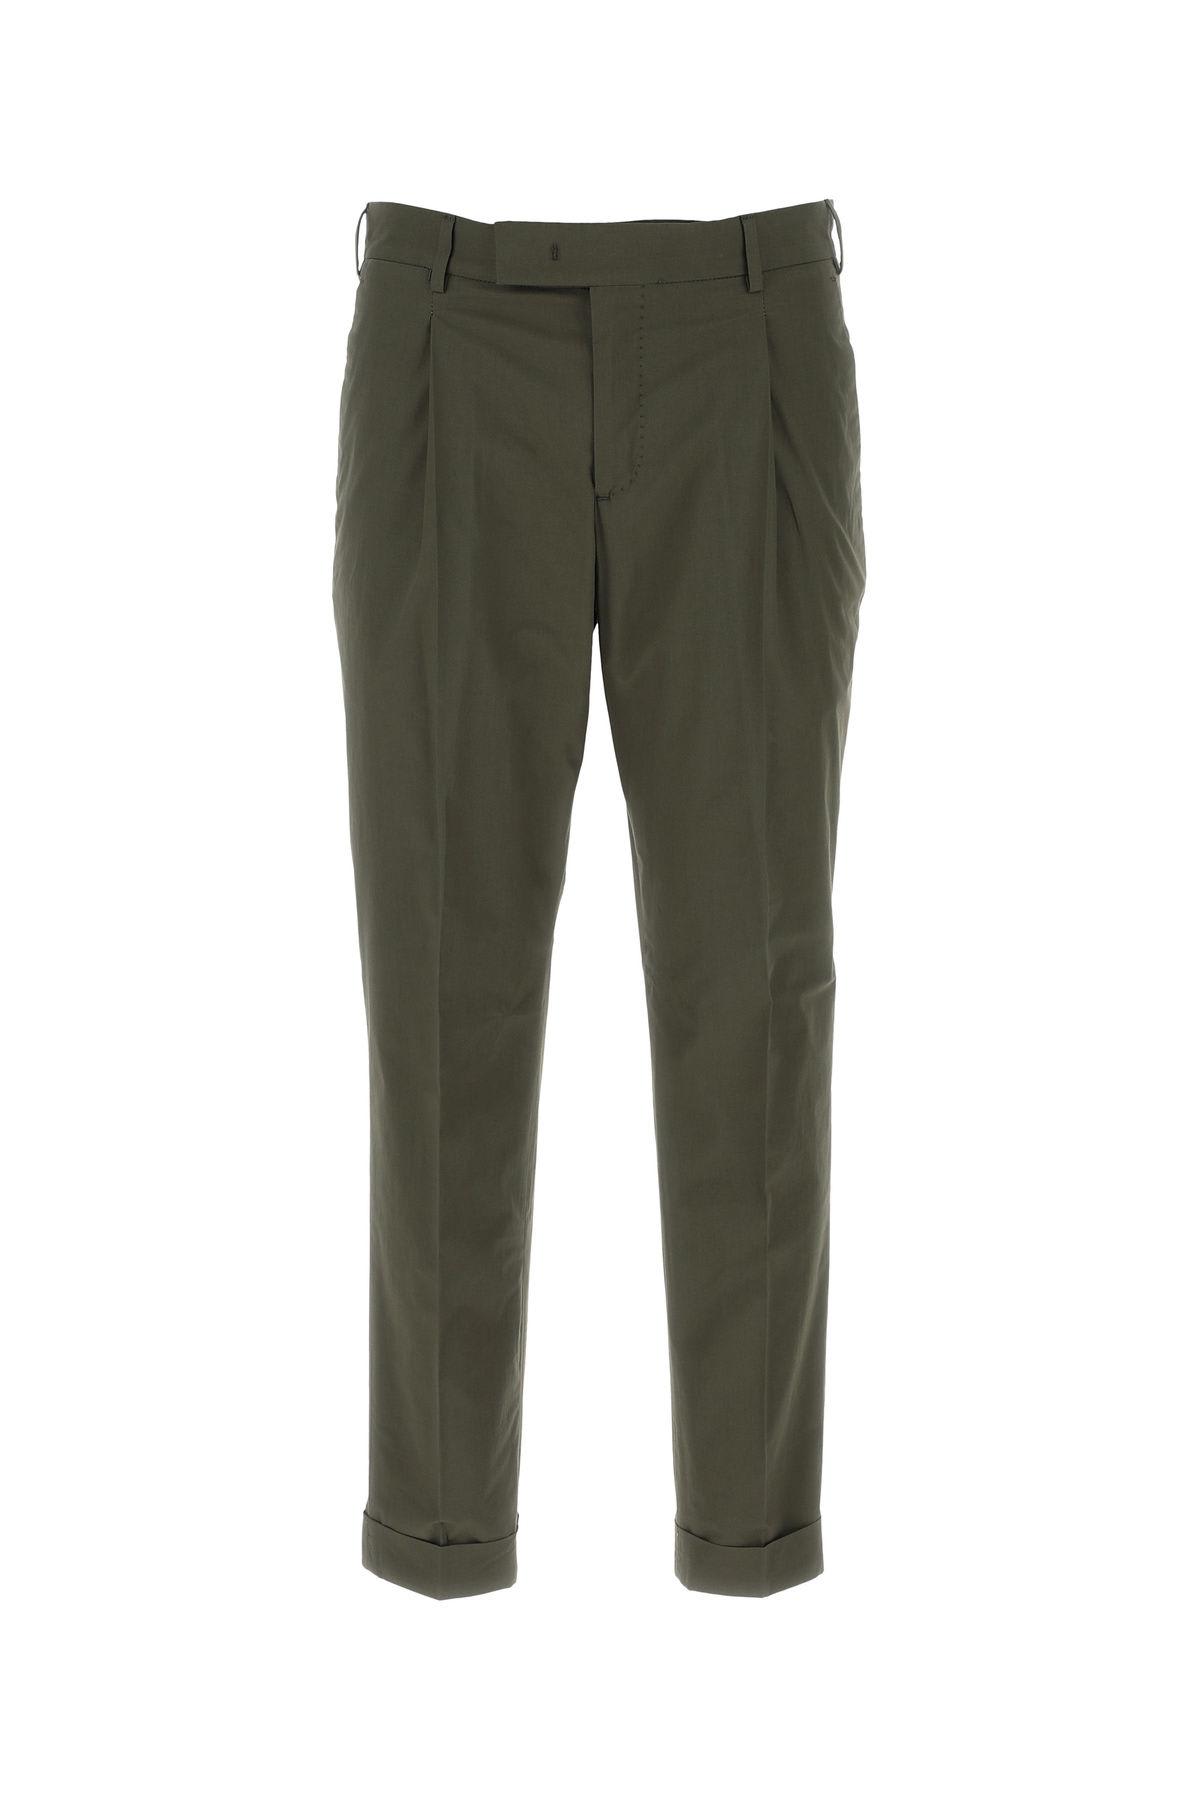 PT01 ARMY GREEN STRETCH COTTON PANT